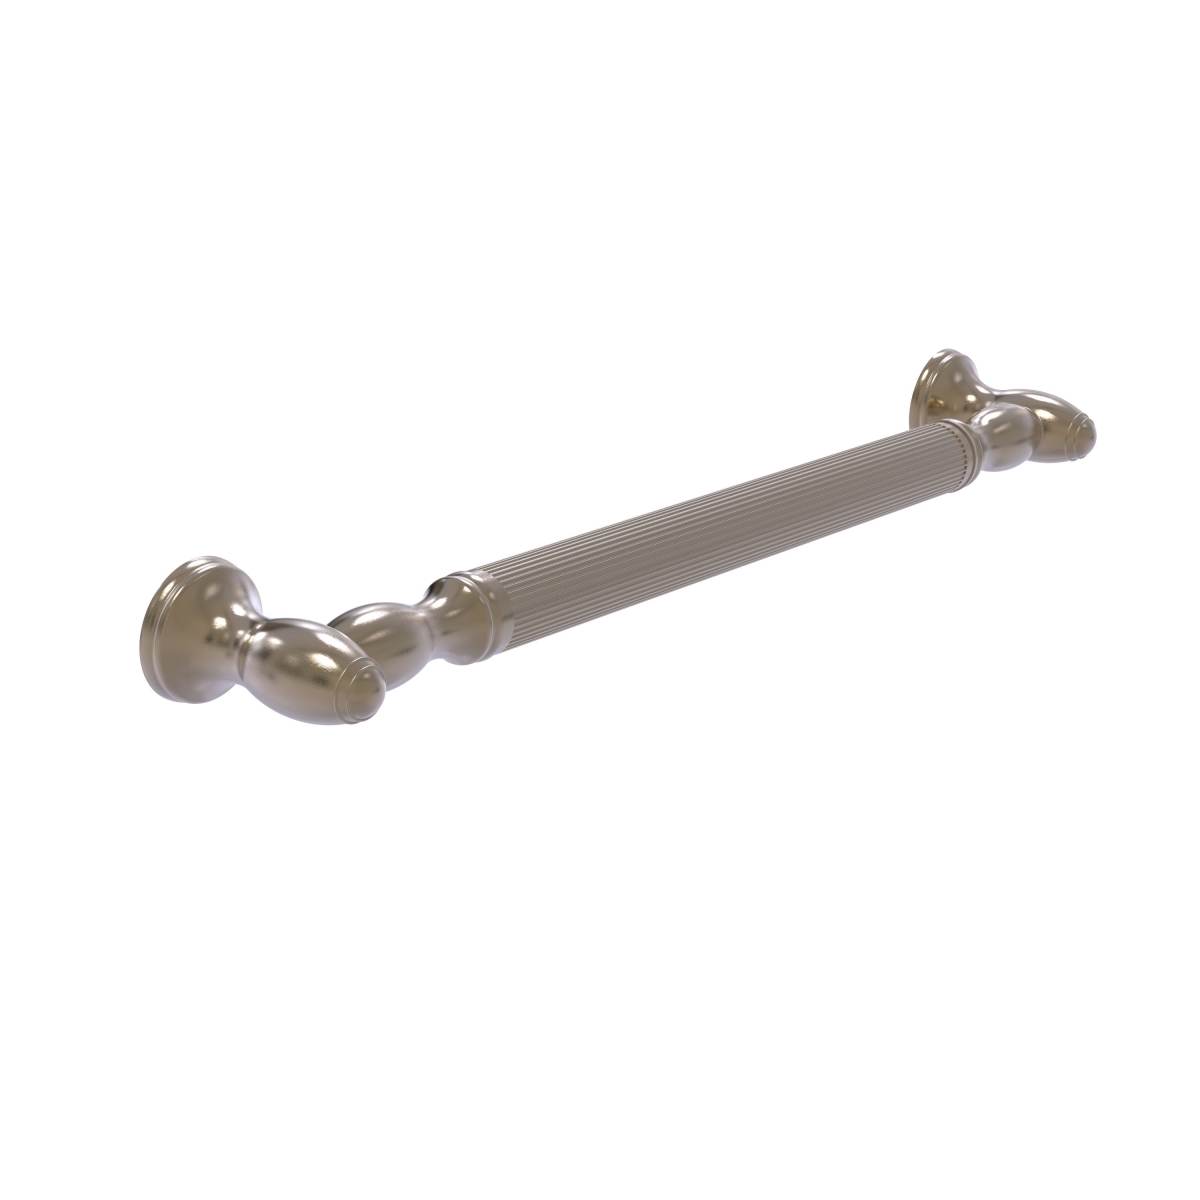 Picture of Allied Brass TD-GRR-36-PEW 36 in. Reeded Grab Bar, Antique Pewter - 3.5 x 38 x 36 in.